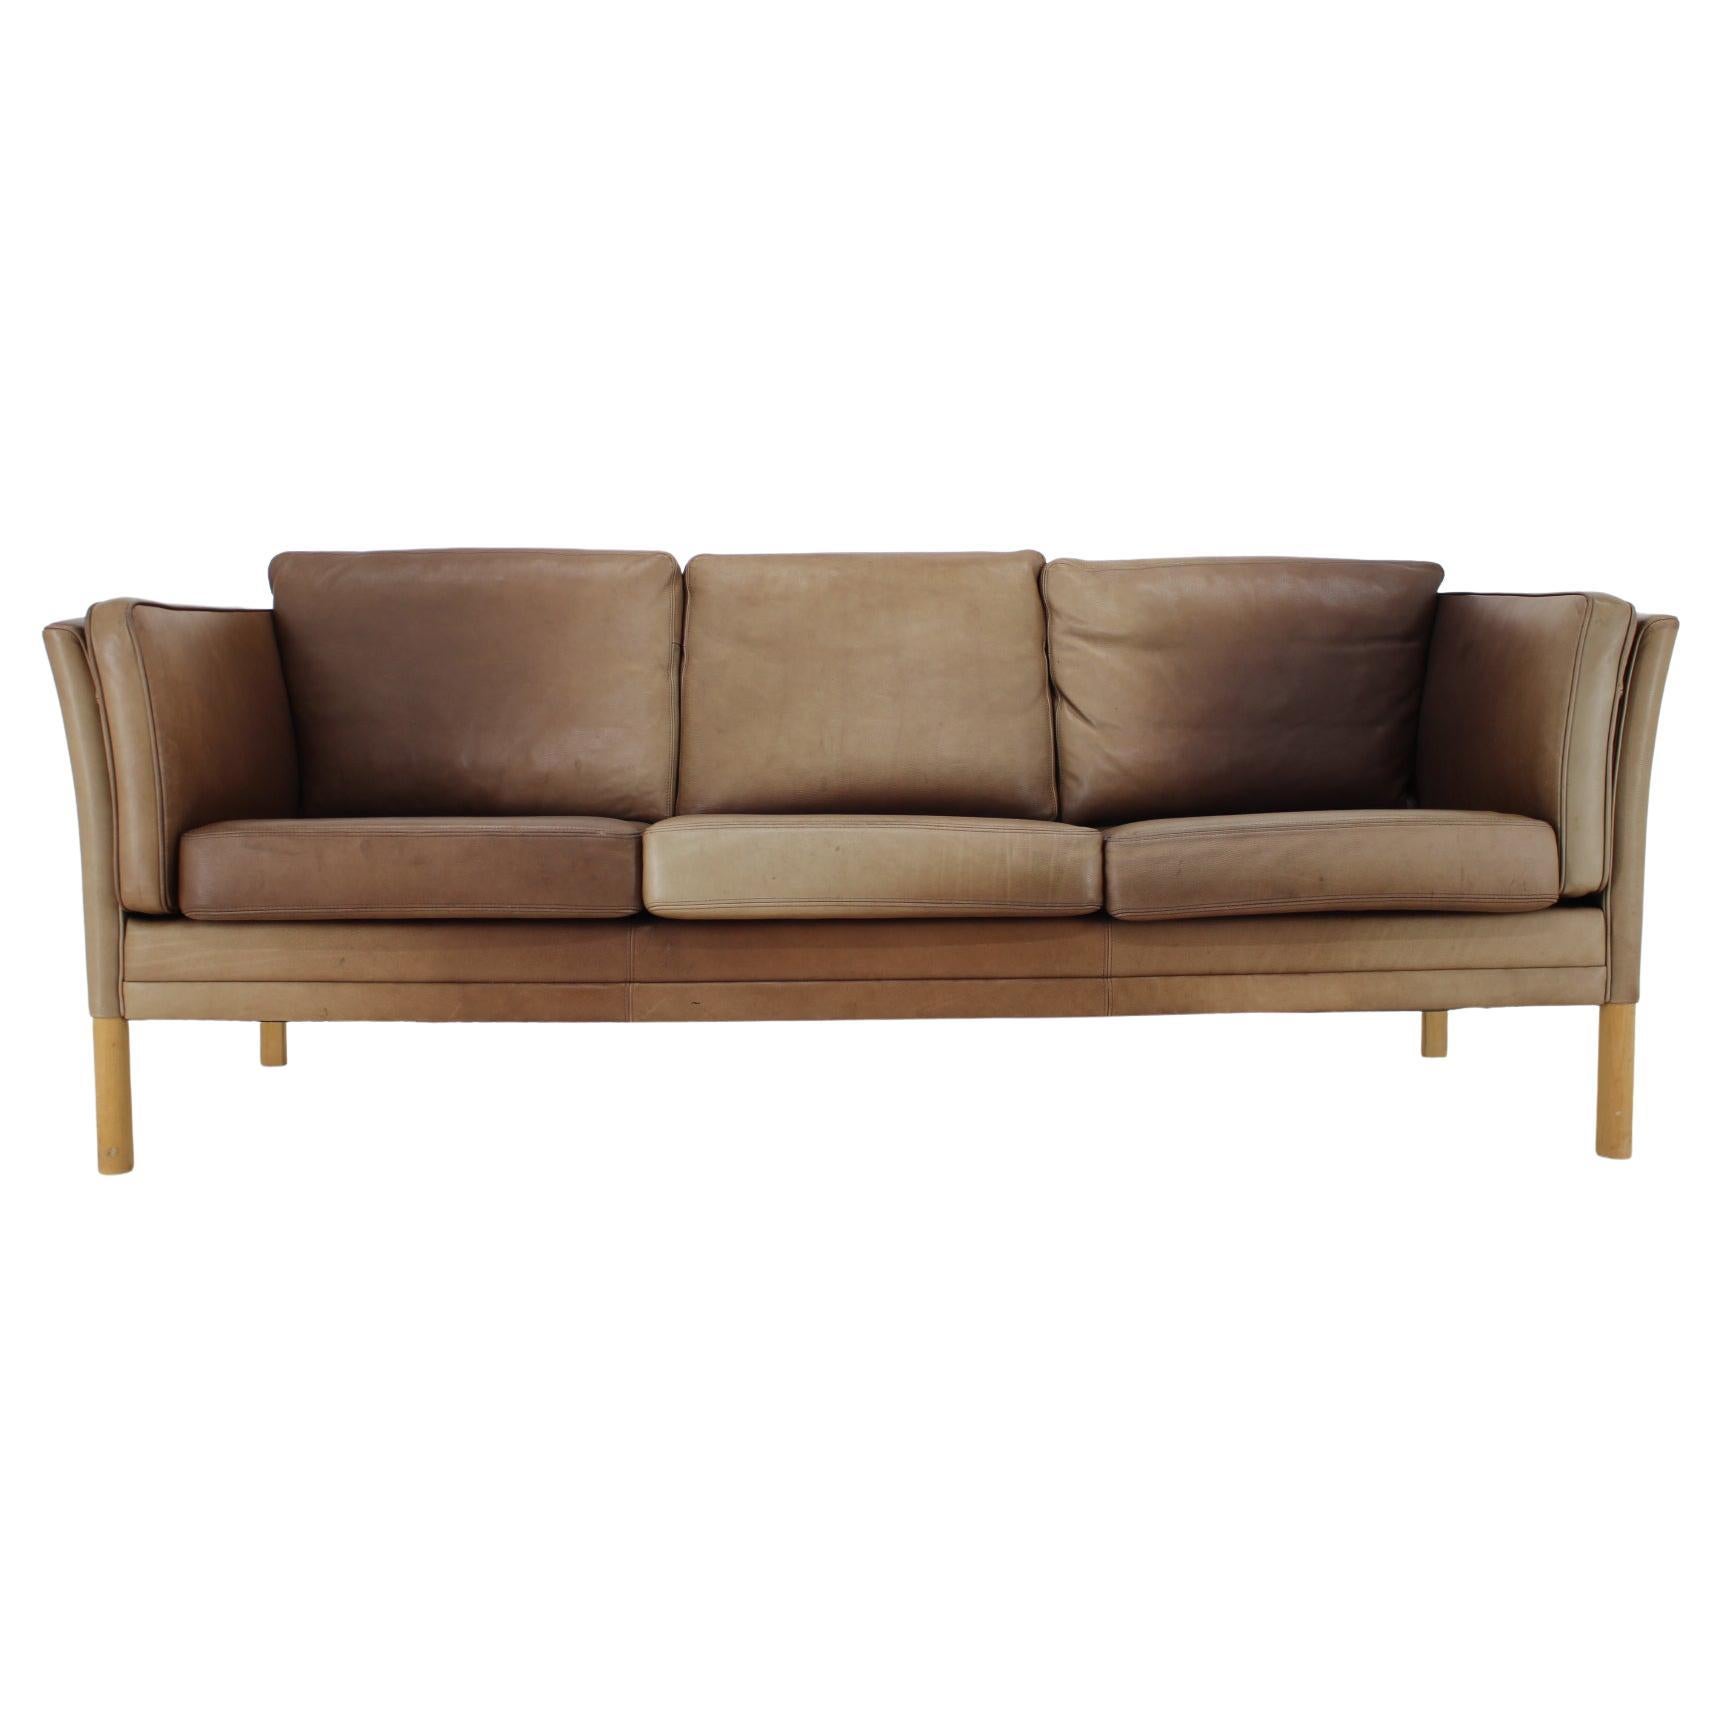 Georg Thams Sofas - 4 For Sale at 1stDibs | straight sofa, thams kvalitet,  thams kvalitet sofa